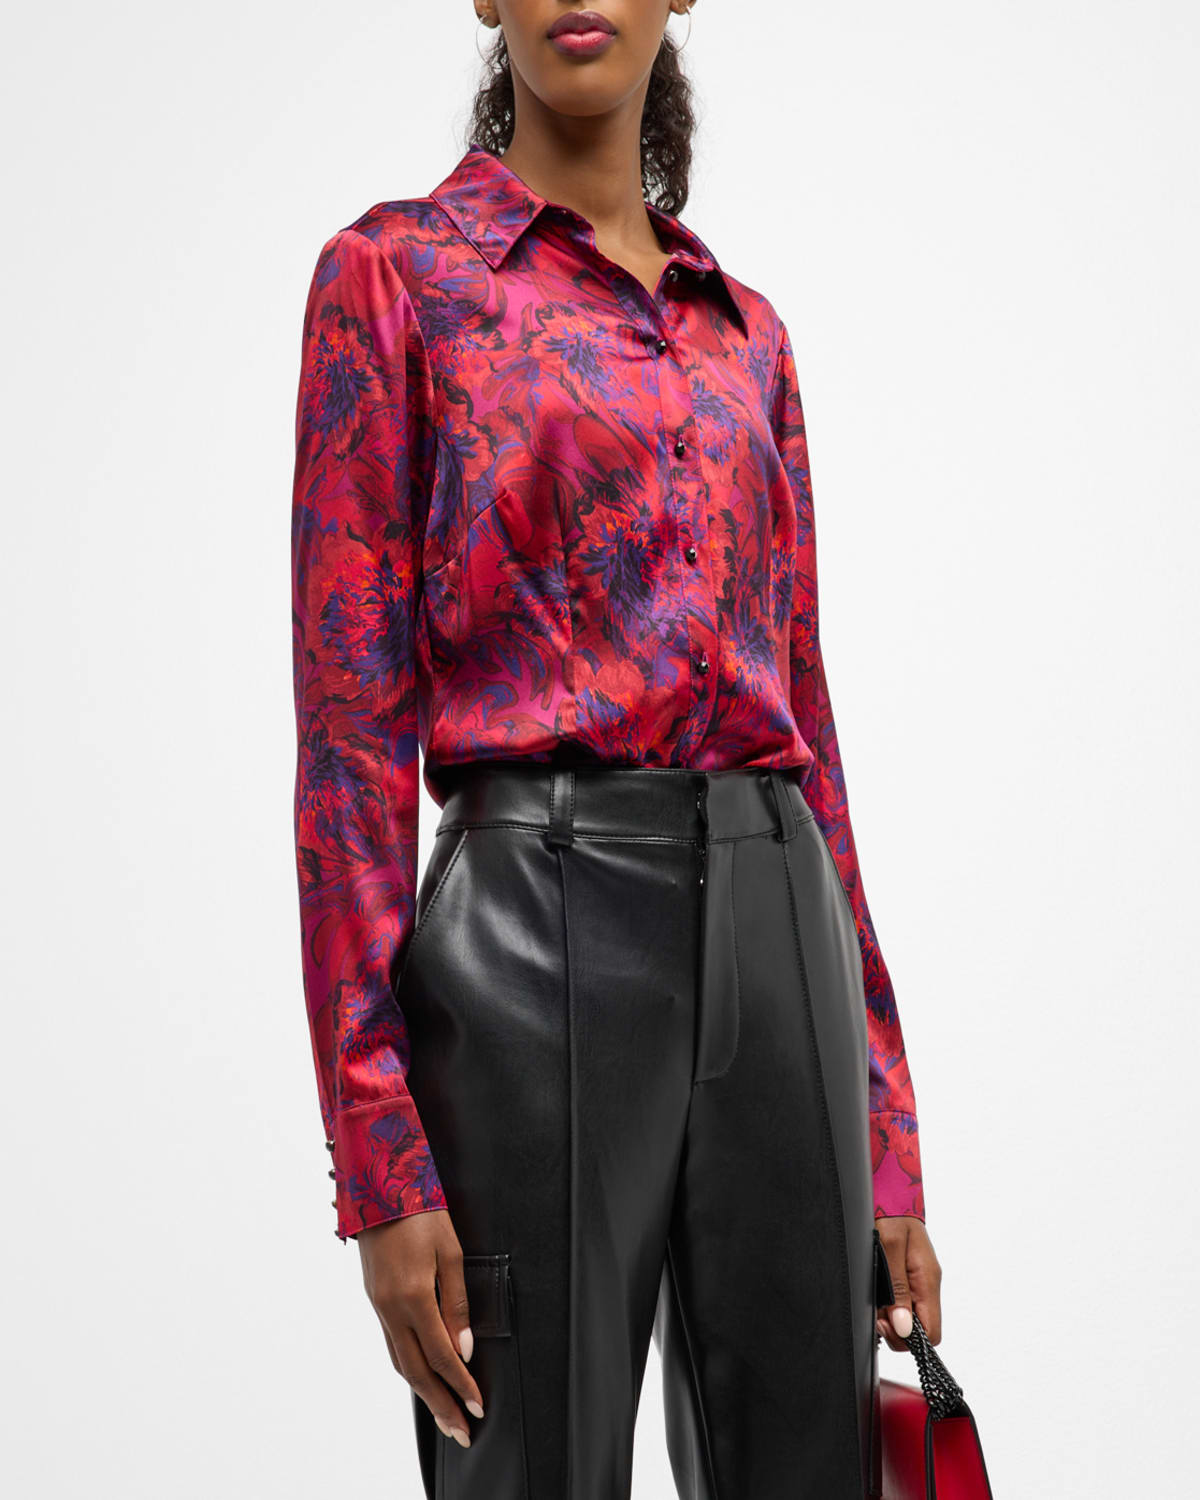 CINQ À SEPT PETRA MARBLED PEONIES PRINTED SILK BUTTON-FRONT TOP